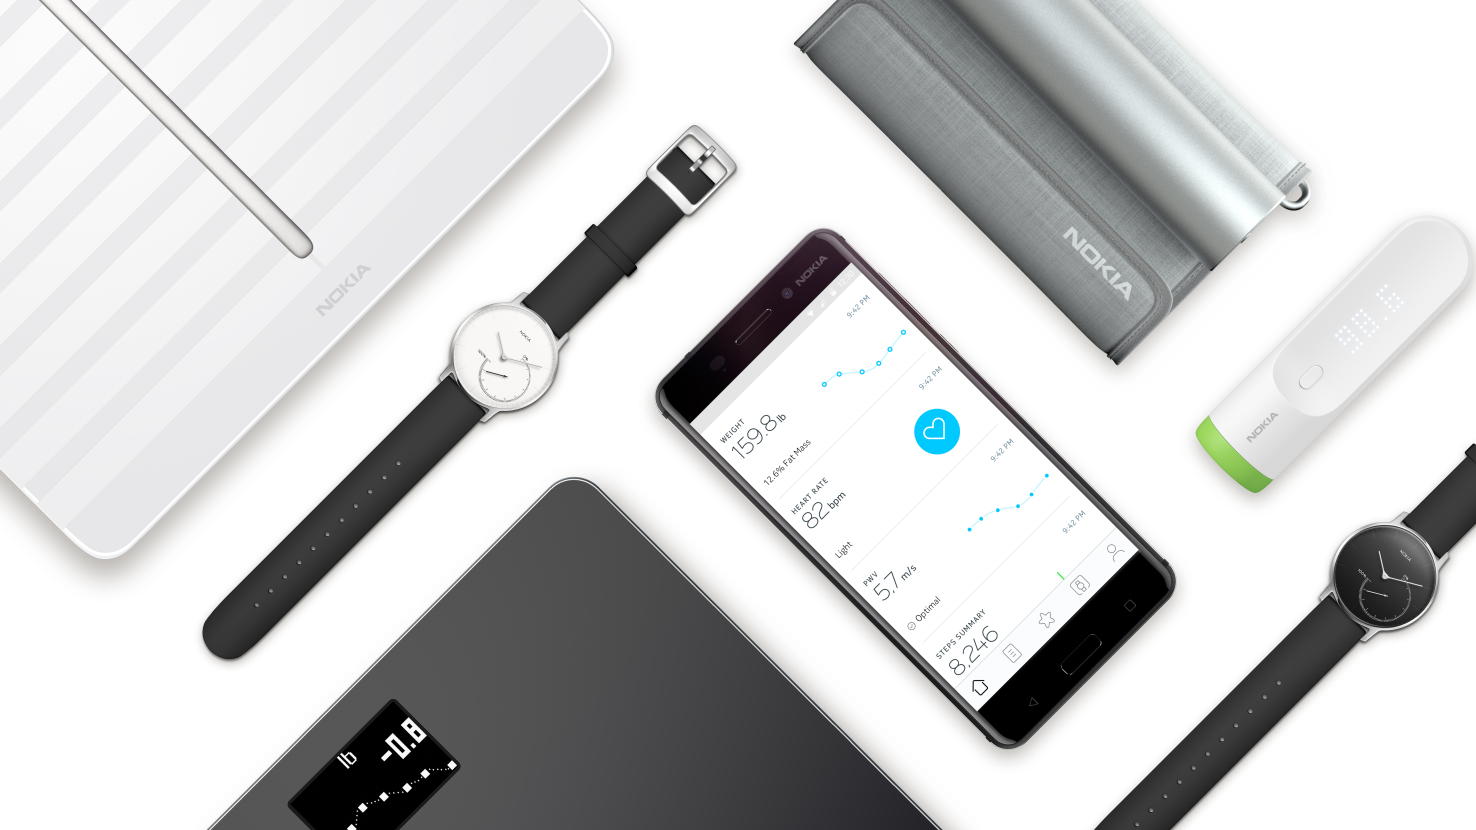 Rest in peace, Withings: Nokia completes transition and French products begin to bear its name